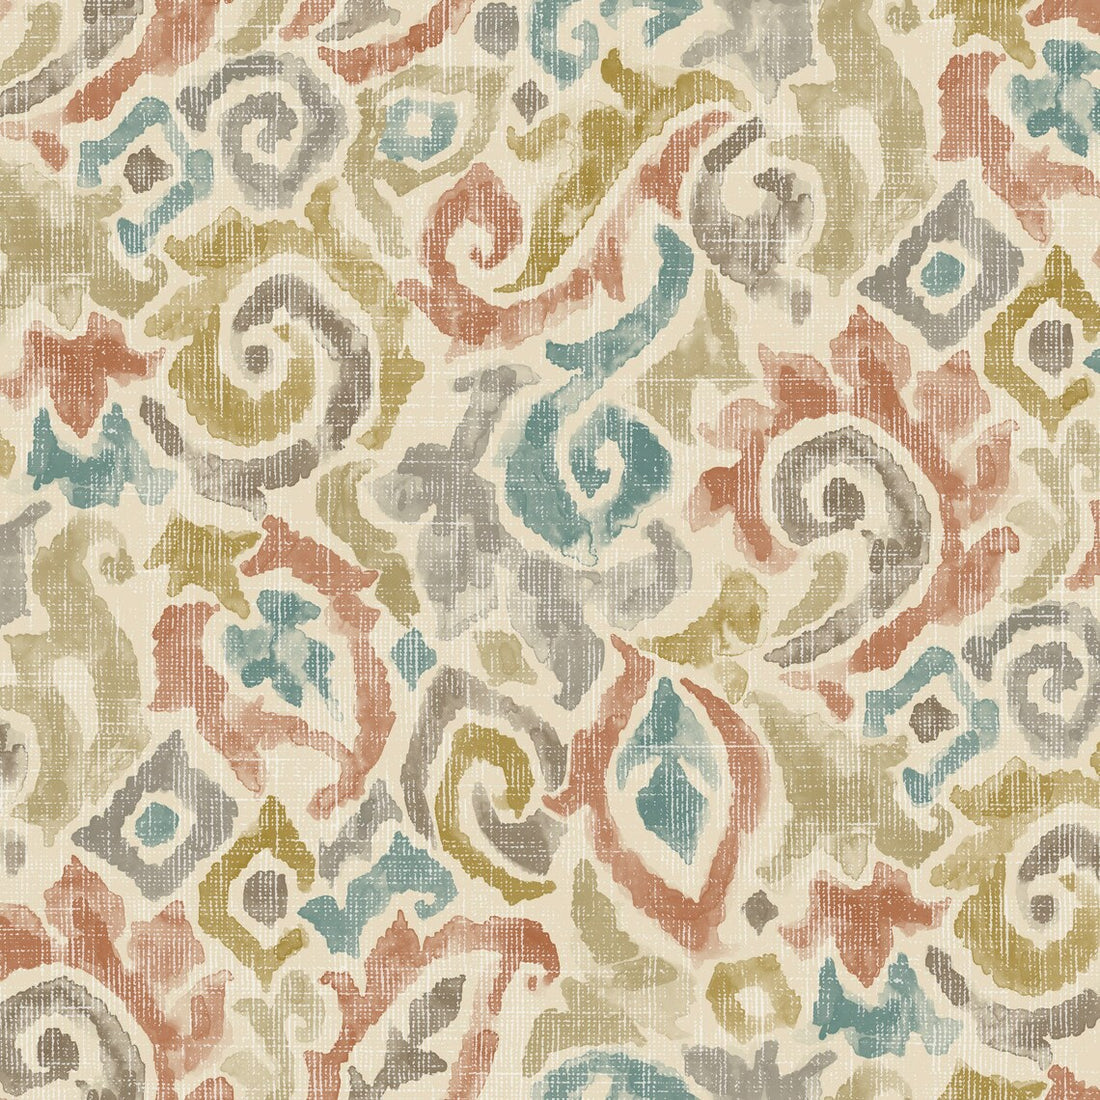 duvet cover in Jester Tuscan Paisley Watercolor- Blue, Terracotta, Gray, Tan